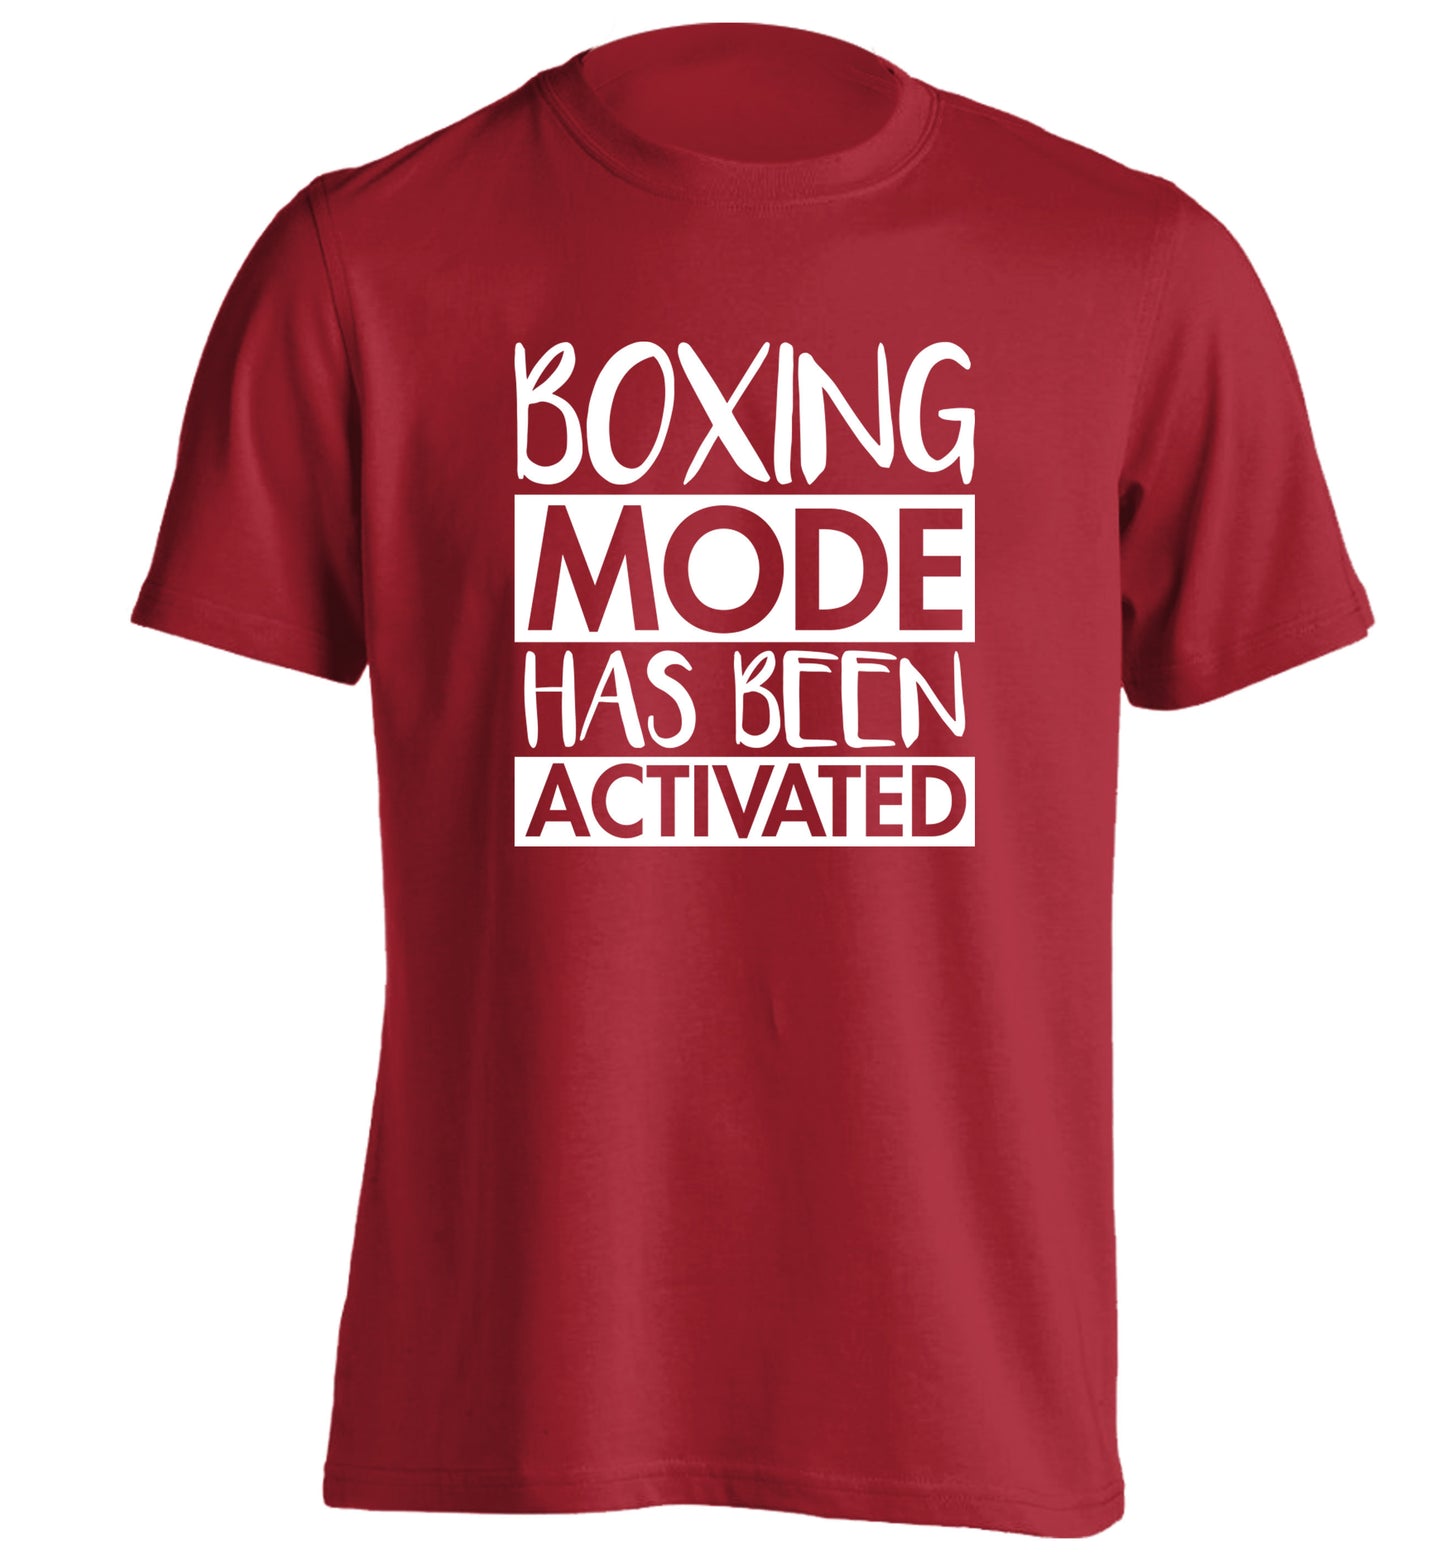 Boxing mode activated adults unisex red Tshirt 2XL